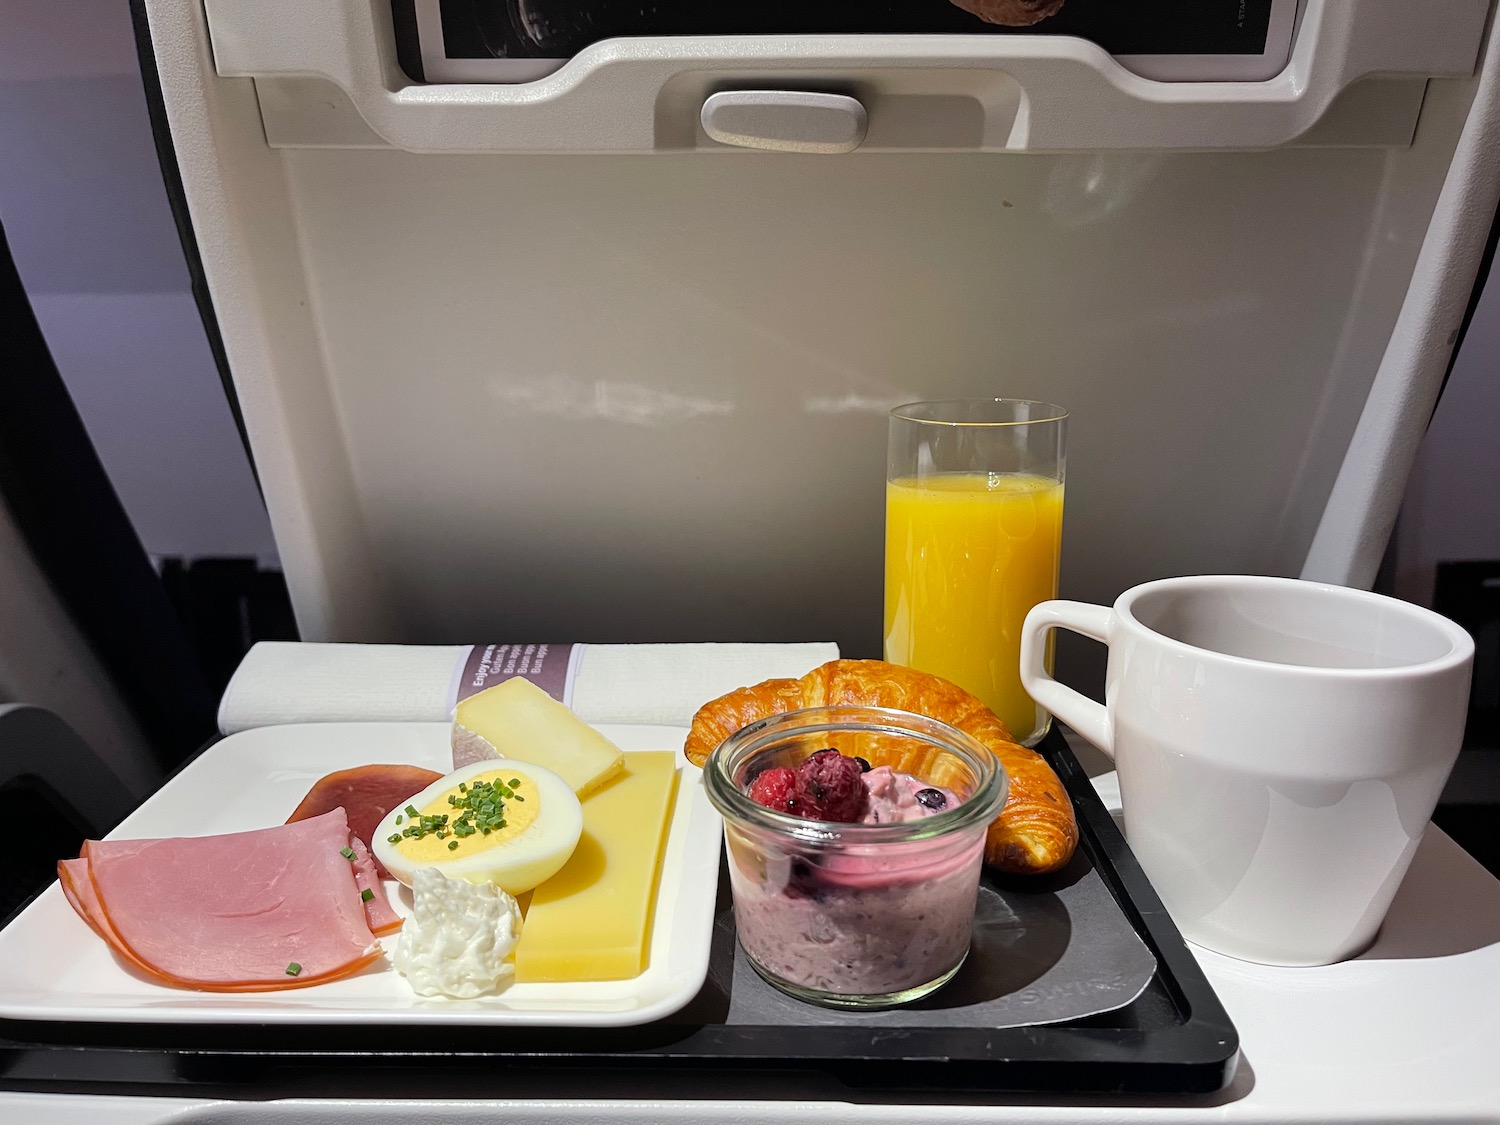 food on a tray with a cup of juice and a glass of orange juice